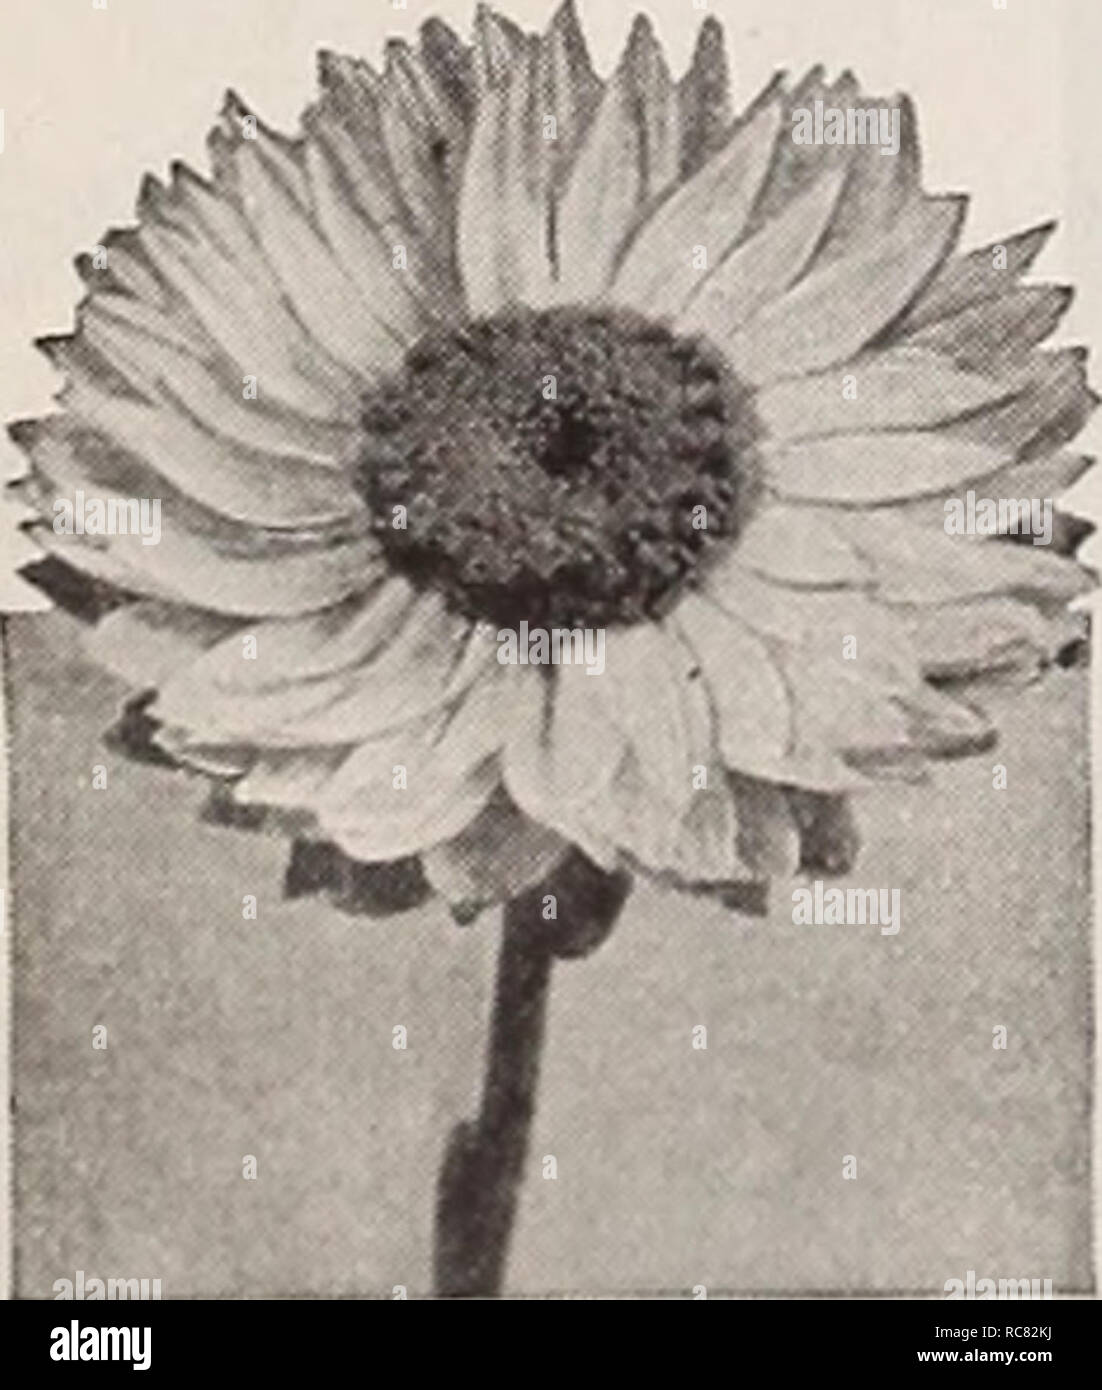 . Dreer's garden book for 1940. Seeds Catalogs; Nursery stock Catalogs; Gardening Equipment and supplies Catalogs; Flowers Seeds Catalogs; Vegetables Seeds Catalogs; Fruit Seeds Catalogs. Ageratum, Blue Cap Pkt. 20c; special pkt. 7Sc.. Acrodinium A dainly Everlasting 15 inches tall. Easily dried for winter bouquets. Pkt. 10c; ]i oz. 25c. Abronia—5an£f Verbena ® A 1005 TJmbellata rosea. A showy trailing plant with fragrant flower heads not unlike those of a Verbena. The blooms are bright rose with a white center. Suited to dry sunny positions and poor soil. Blooms from July until frost. Seeds g Stock Photo